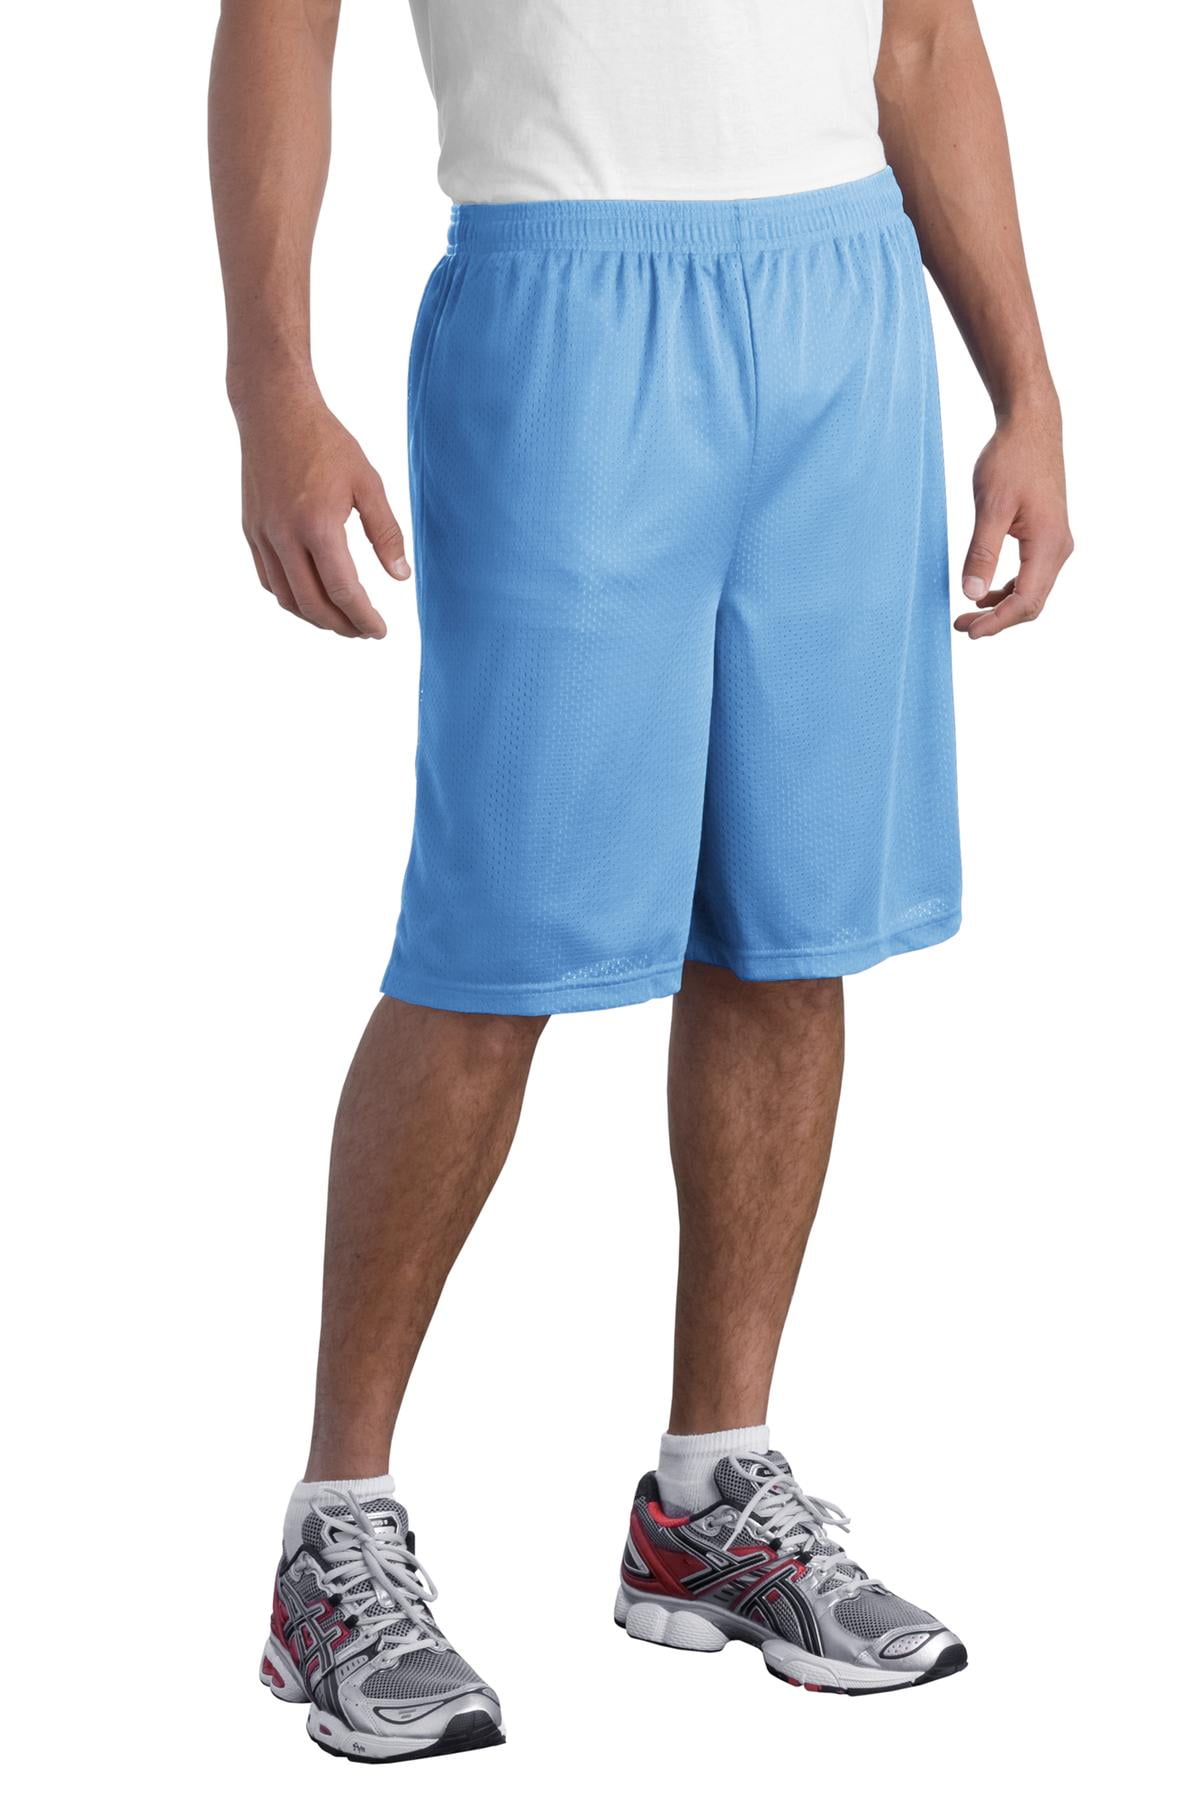 North 15 Mens Athletic Basketball Shorts with Side Pockets-3021-Blk/Ryl-3XL